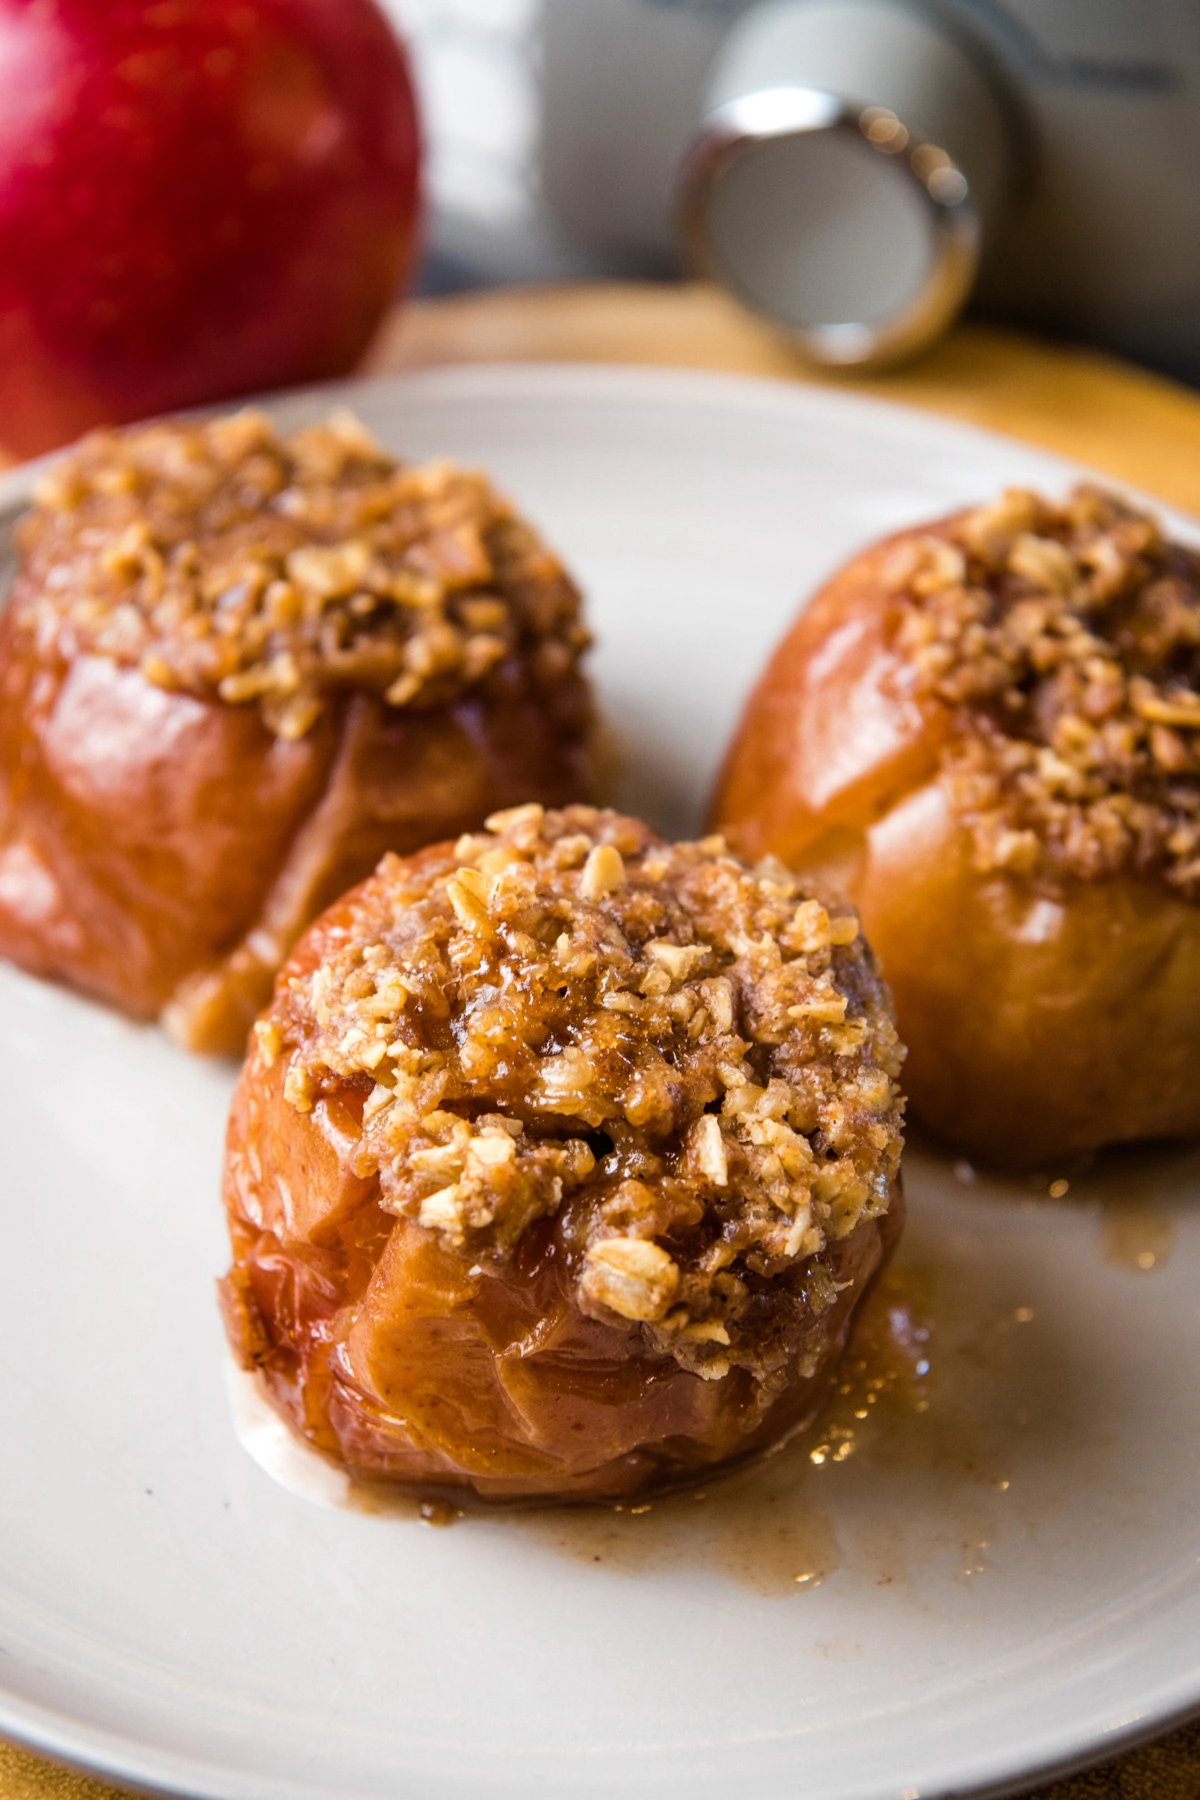 Crock Pot baked apples stuffed with oats on gray plate